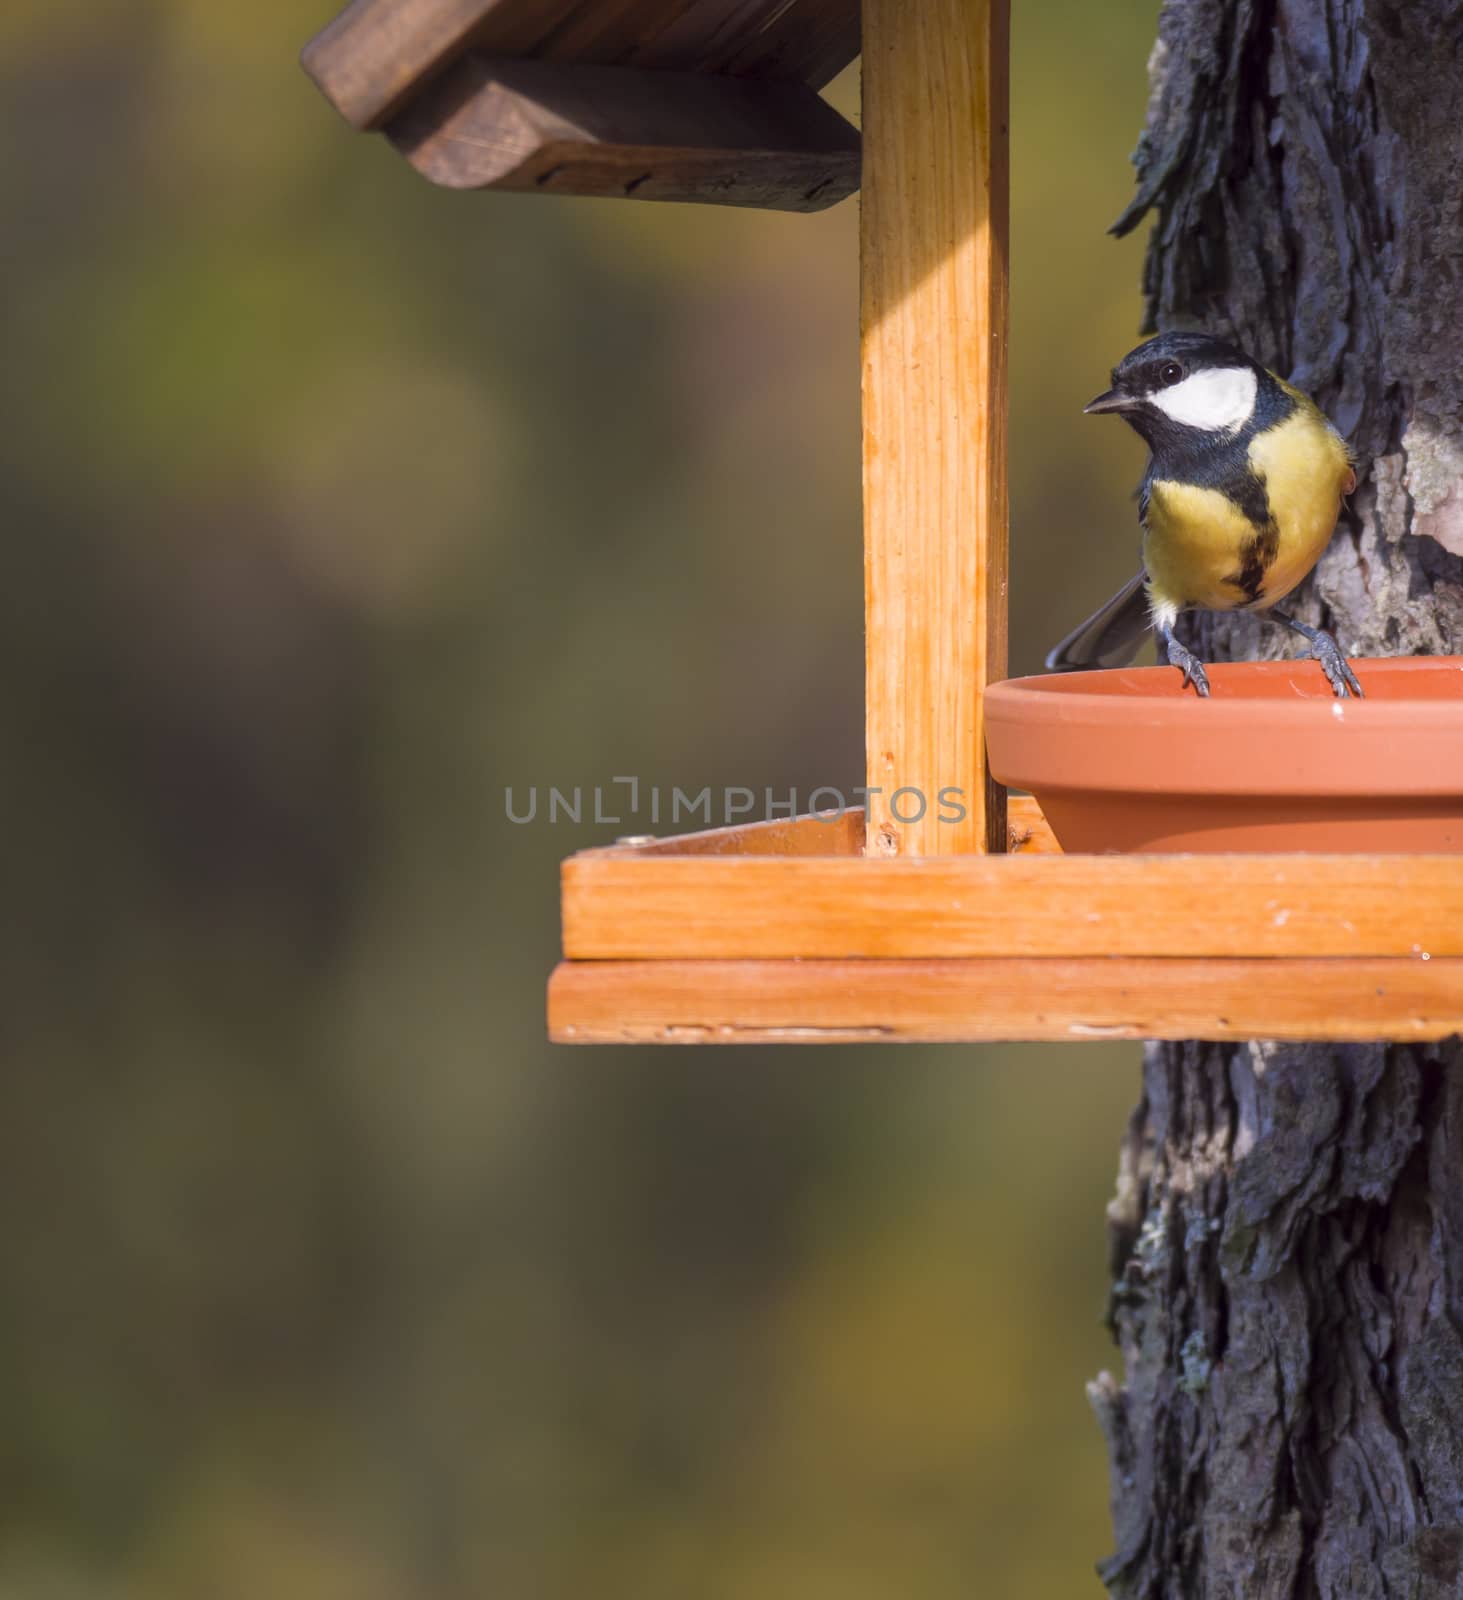 Close up Great tit, Parus major bird perched on the bird feeder table with sunflower seed. Bird feeding concept. Selective focus. by Henkeova